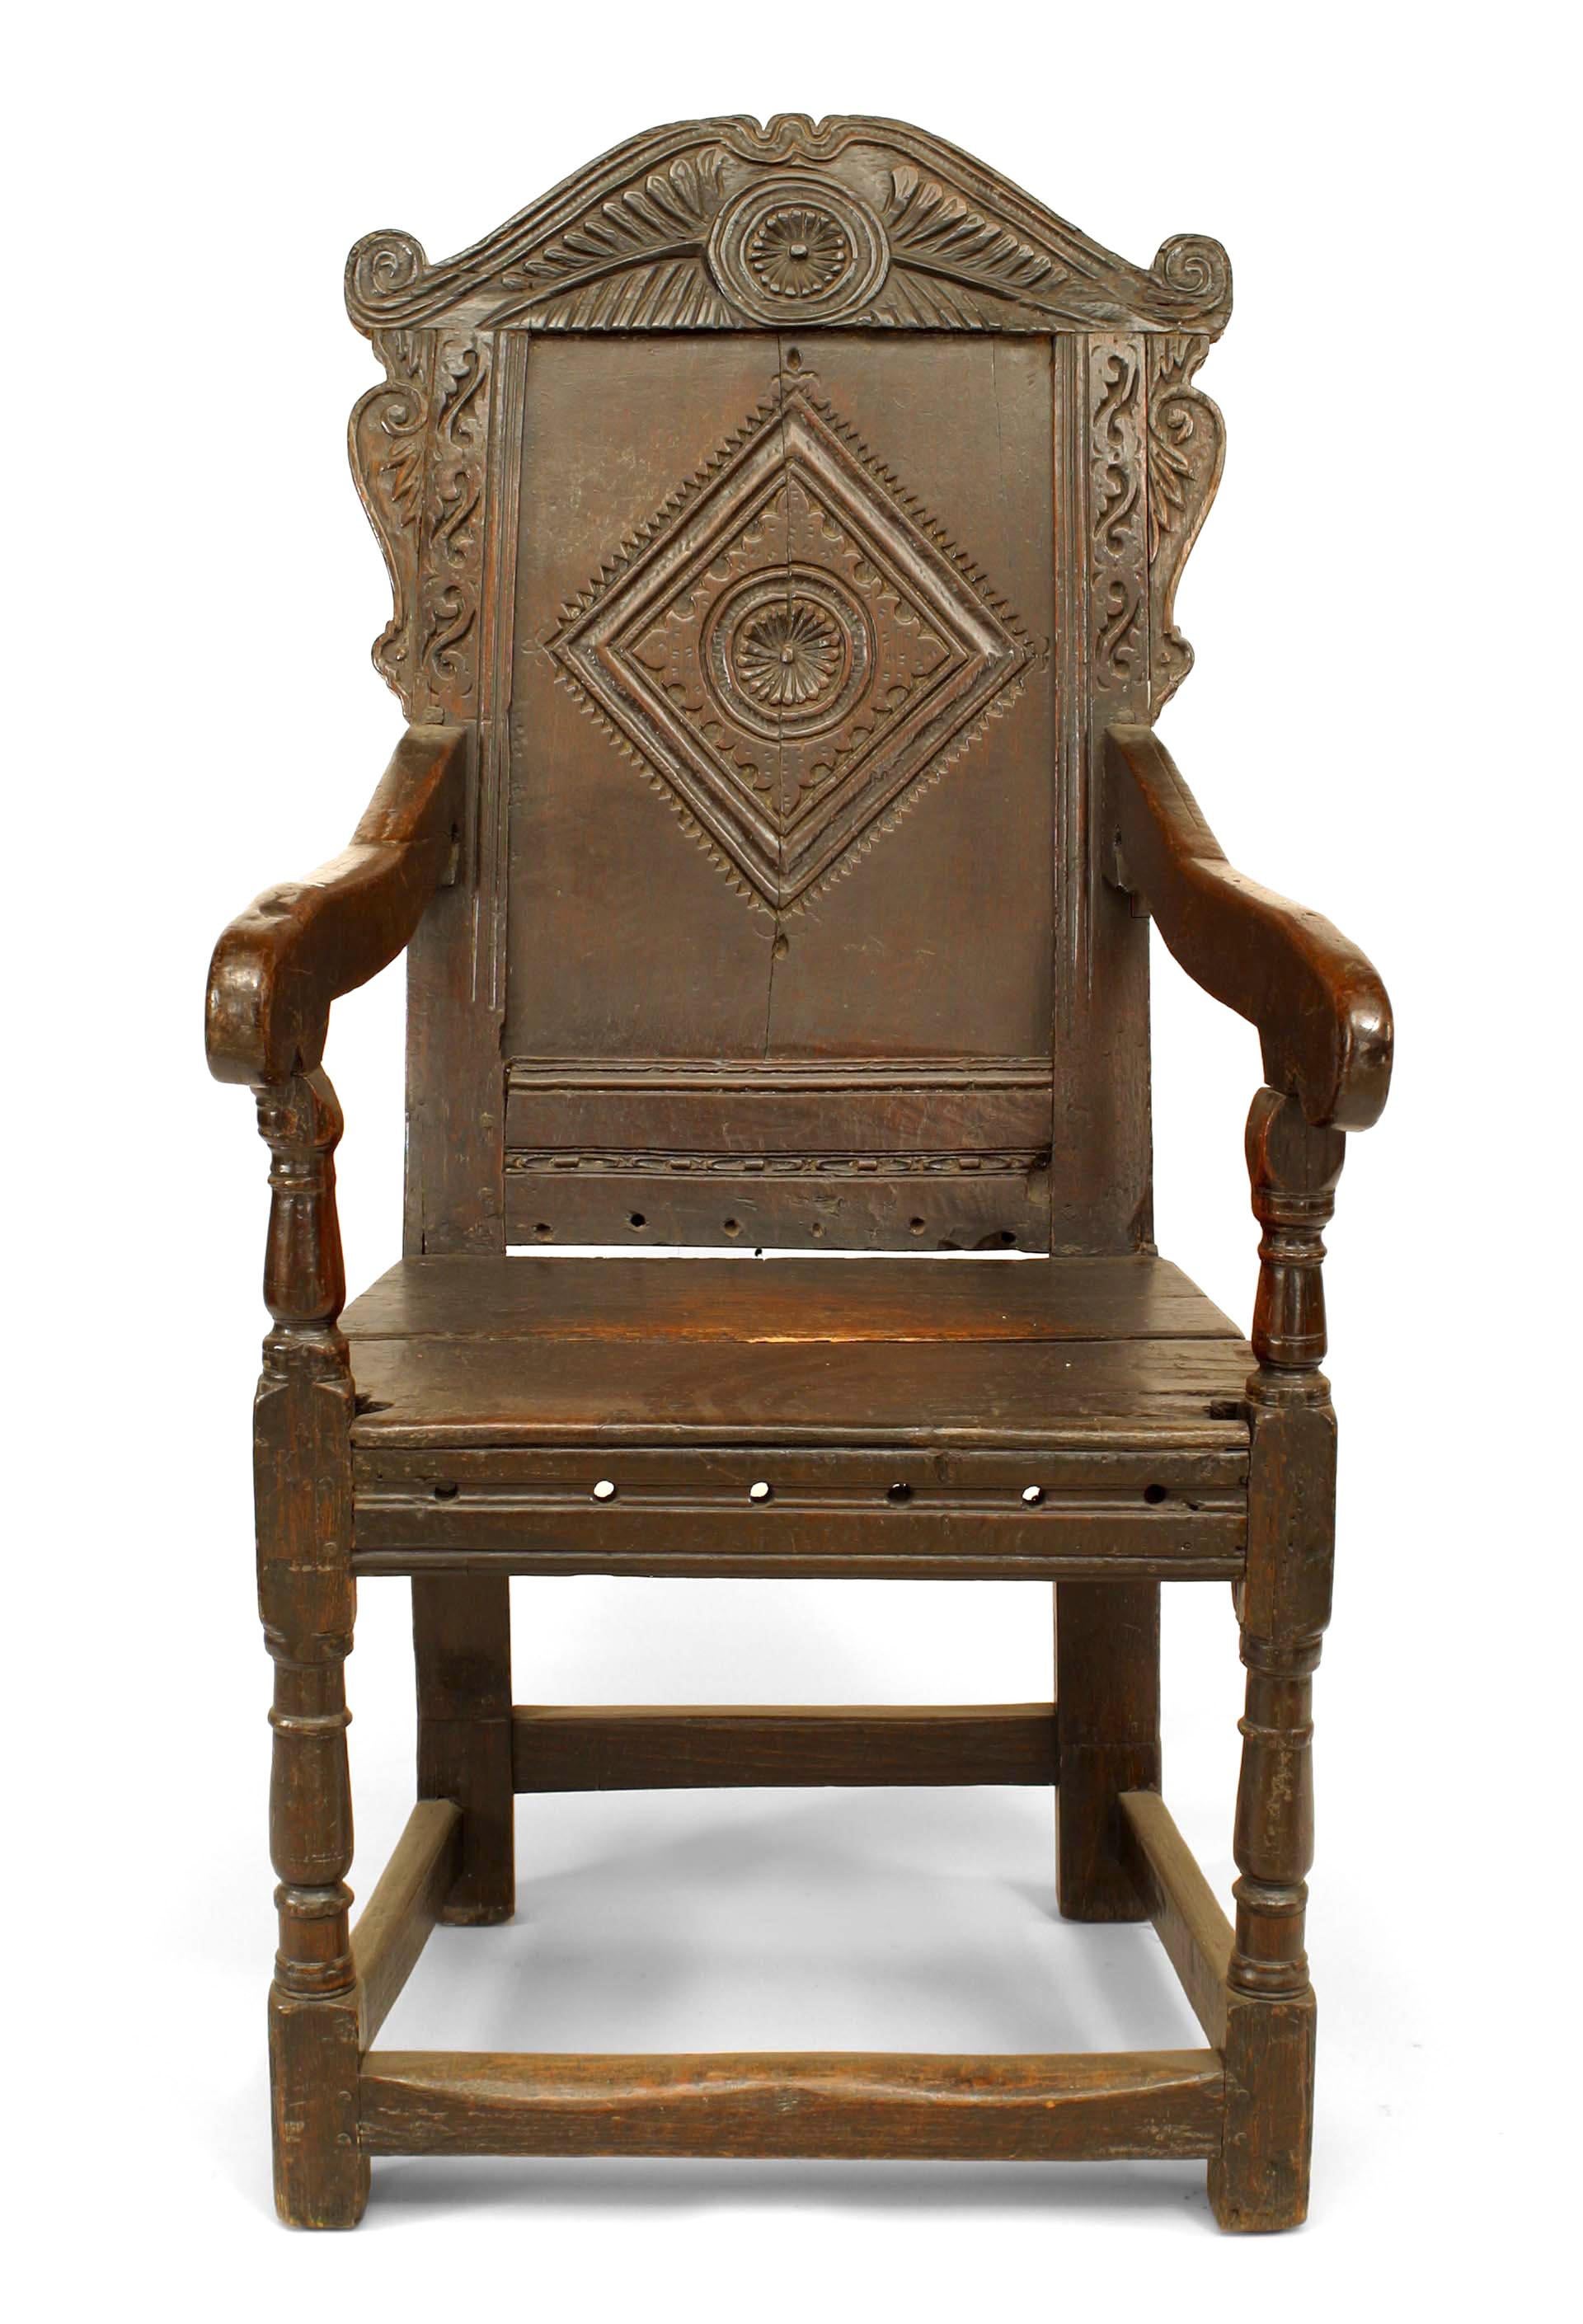 English Renaissance (17th Cent) Wainscot style oak arm chair with diamond designed carved back. (rePairs to back)
